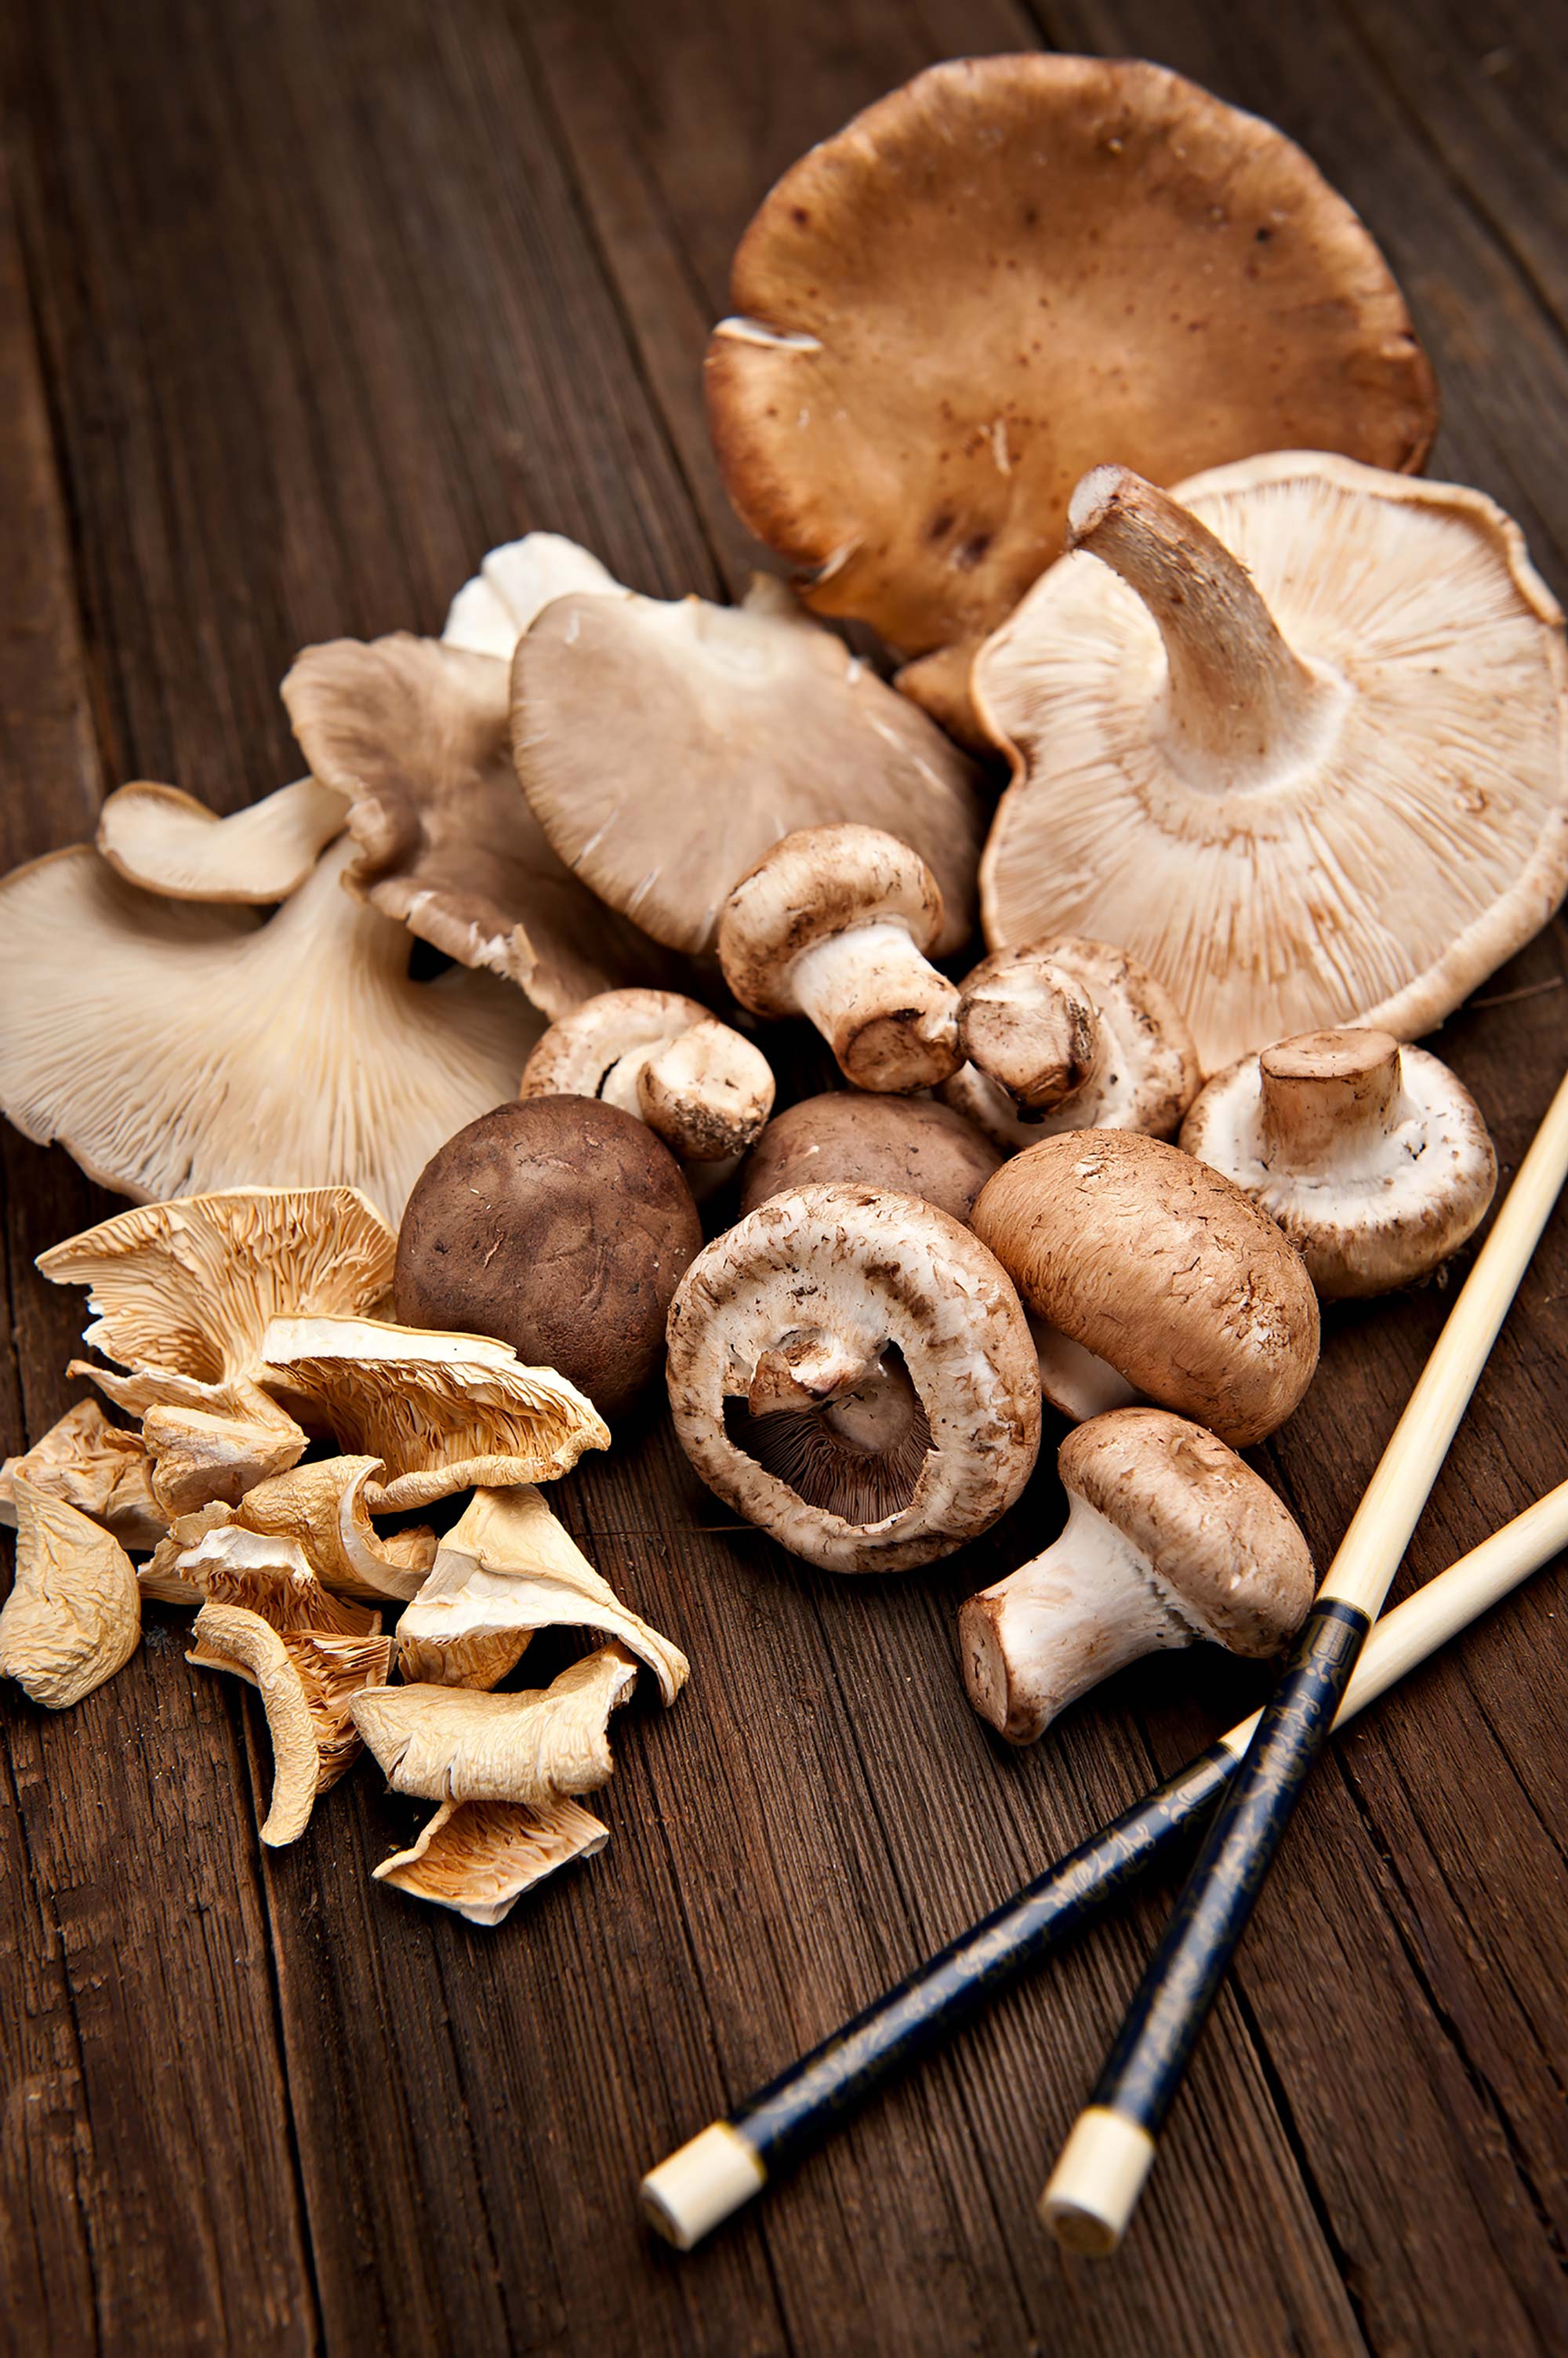 Mushrooms for Cancer: How to Fight & Prevent Cancer with Mushrooms